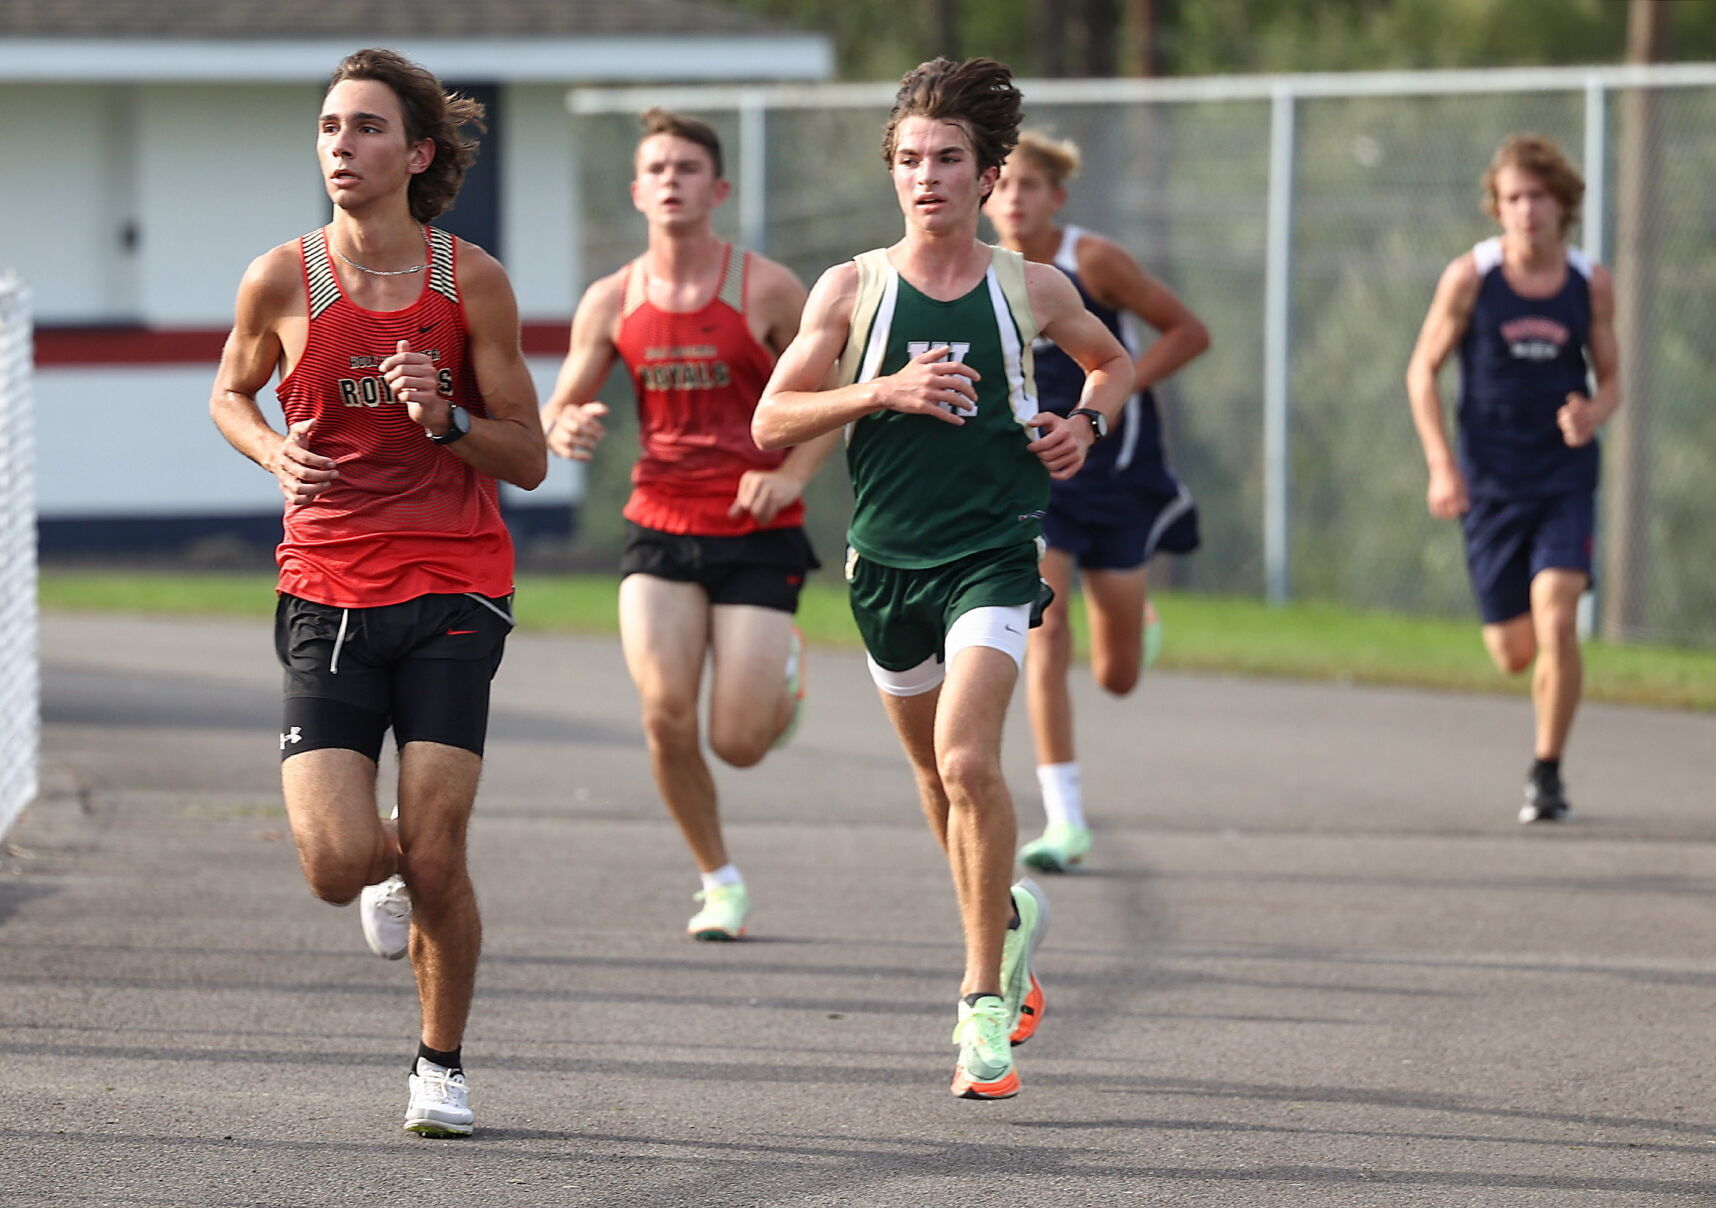 HIGH SCHOOL CROSS COUNTRY: Novelli finishes first to lift Seminary